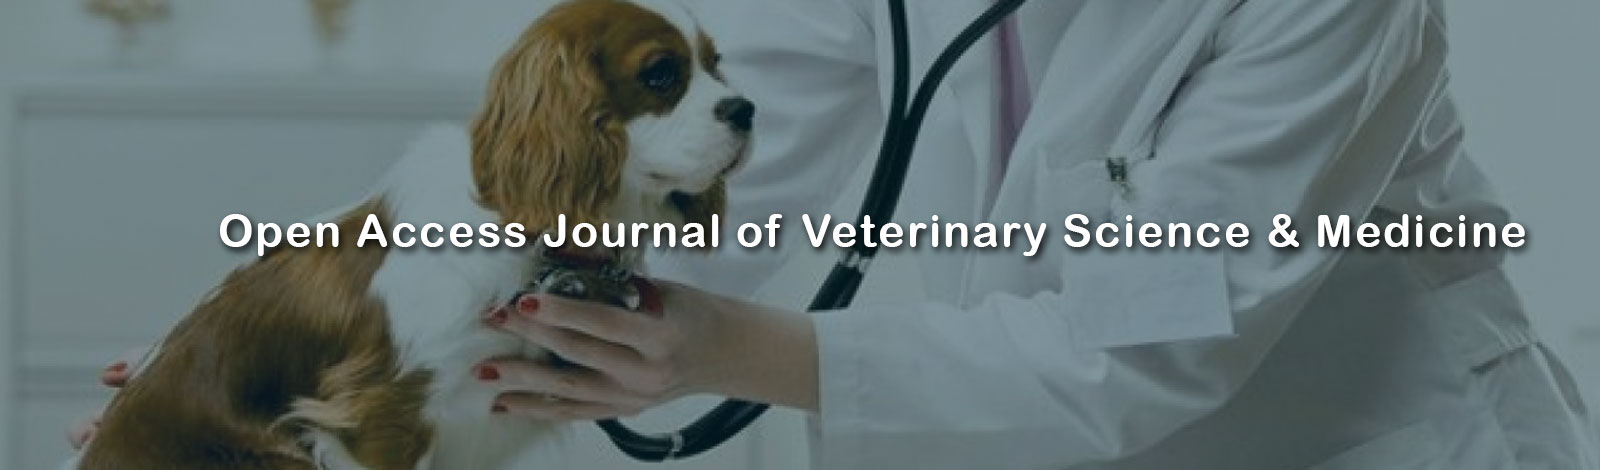 Open Access Journal of Veterinary Science and Medicine